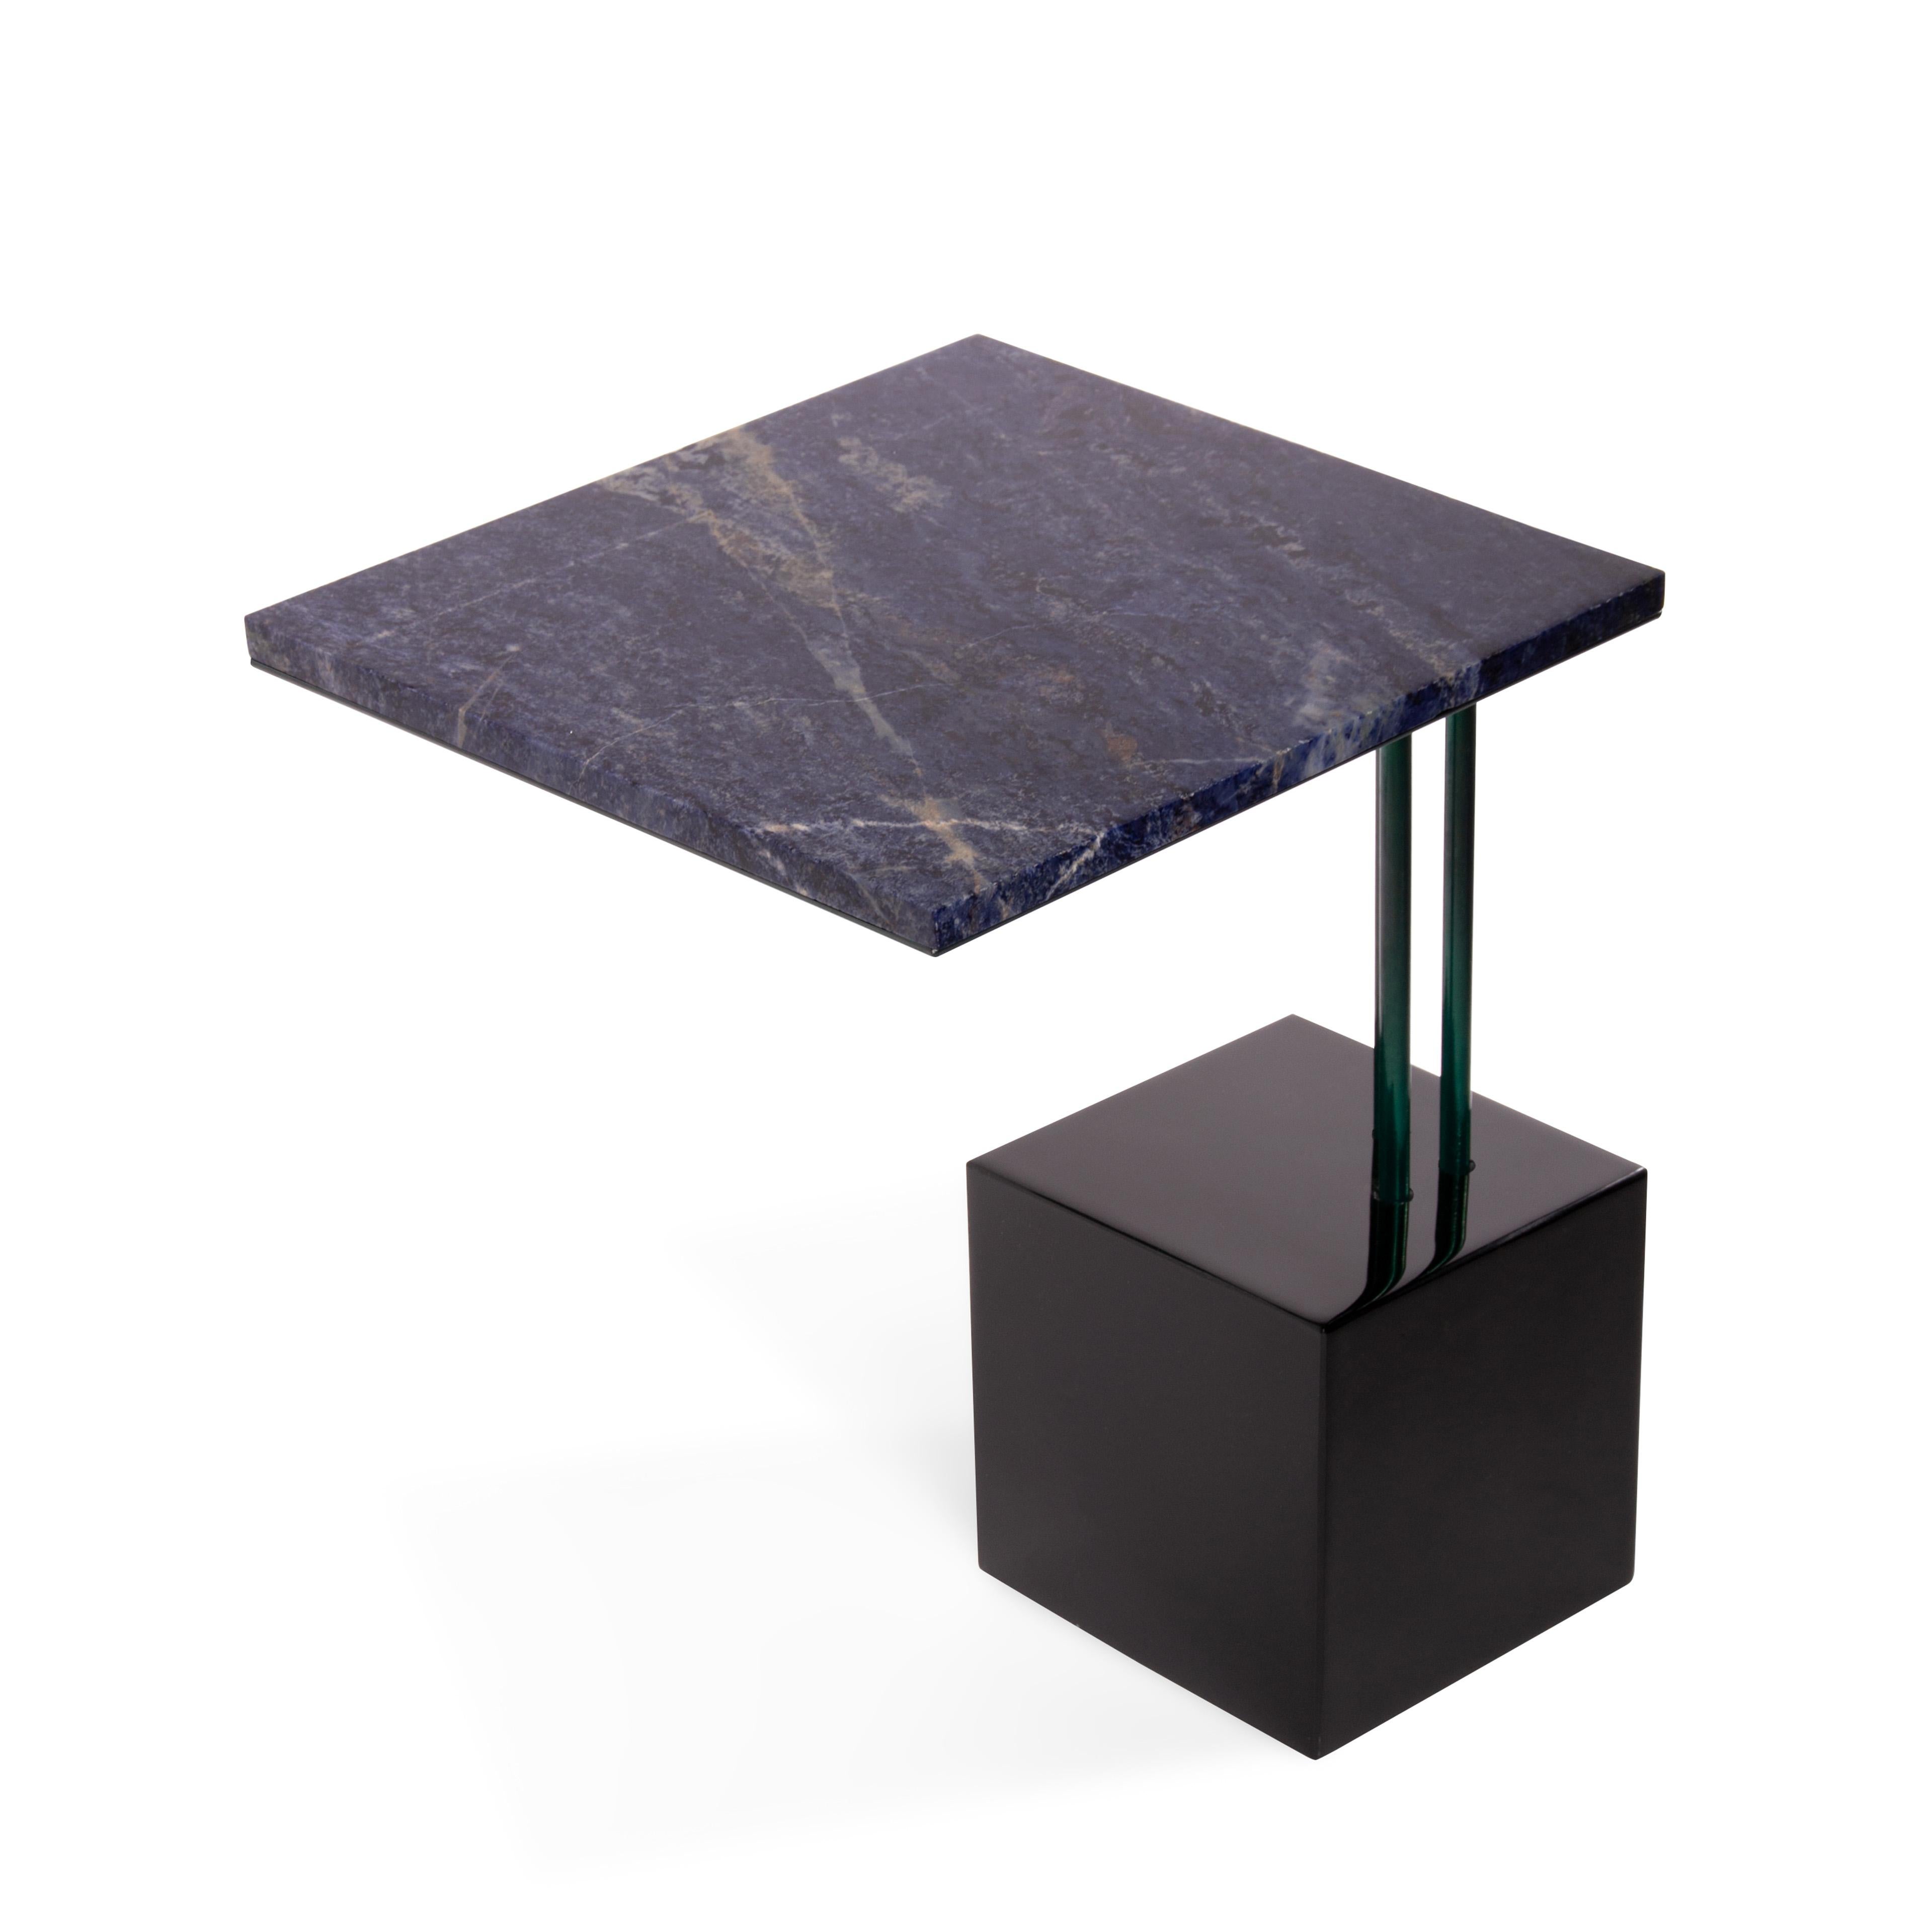 Mexican Configurable Geometry III Side Table by Sten Studio, REP by Tuleste Factory For Sale